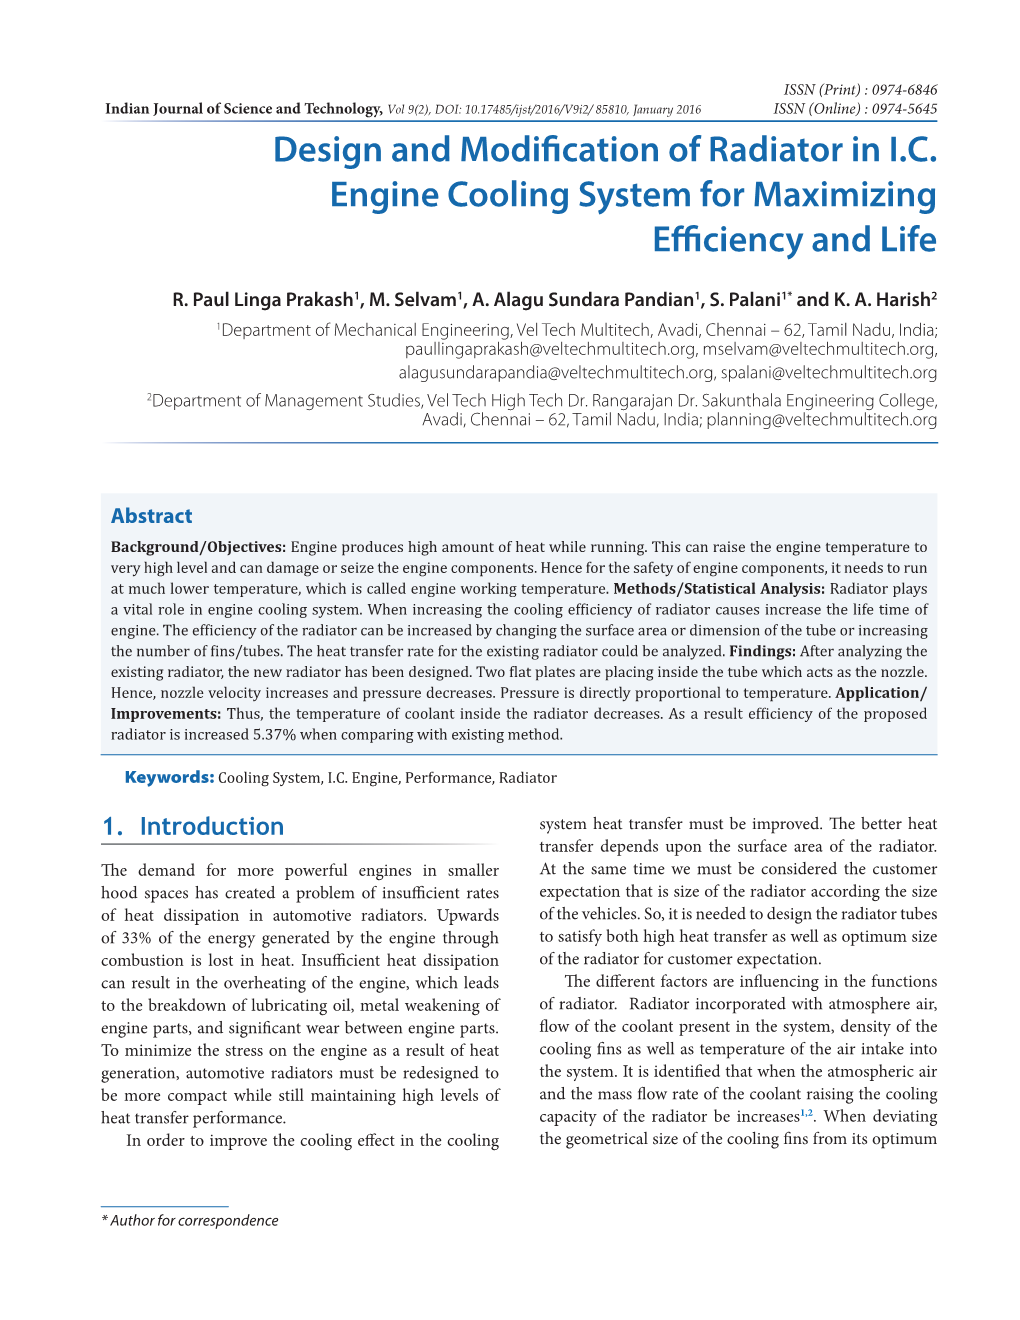 Design and Modification of Radiator in I.C. Engine Cooling System for Maximizing Efficiency and Life